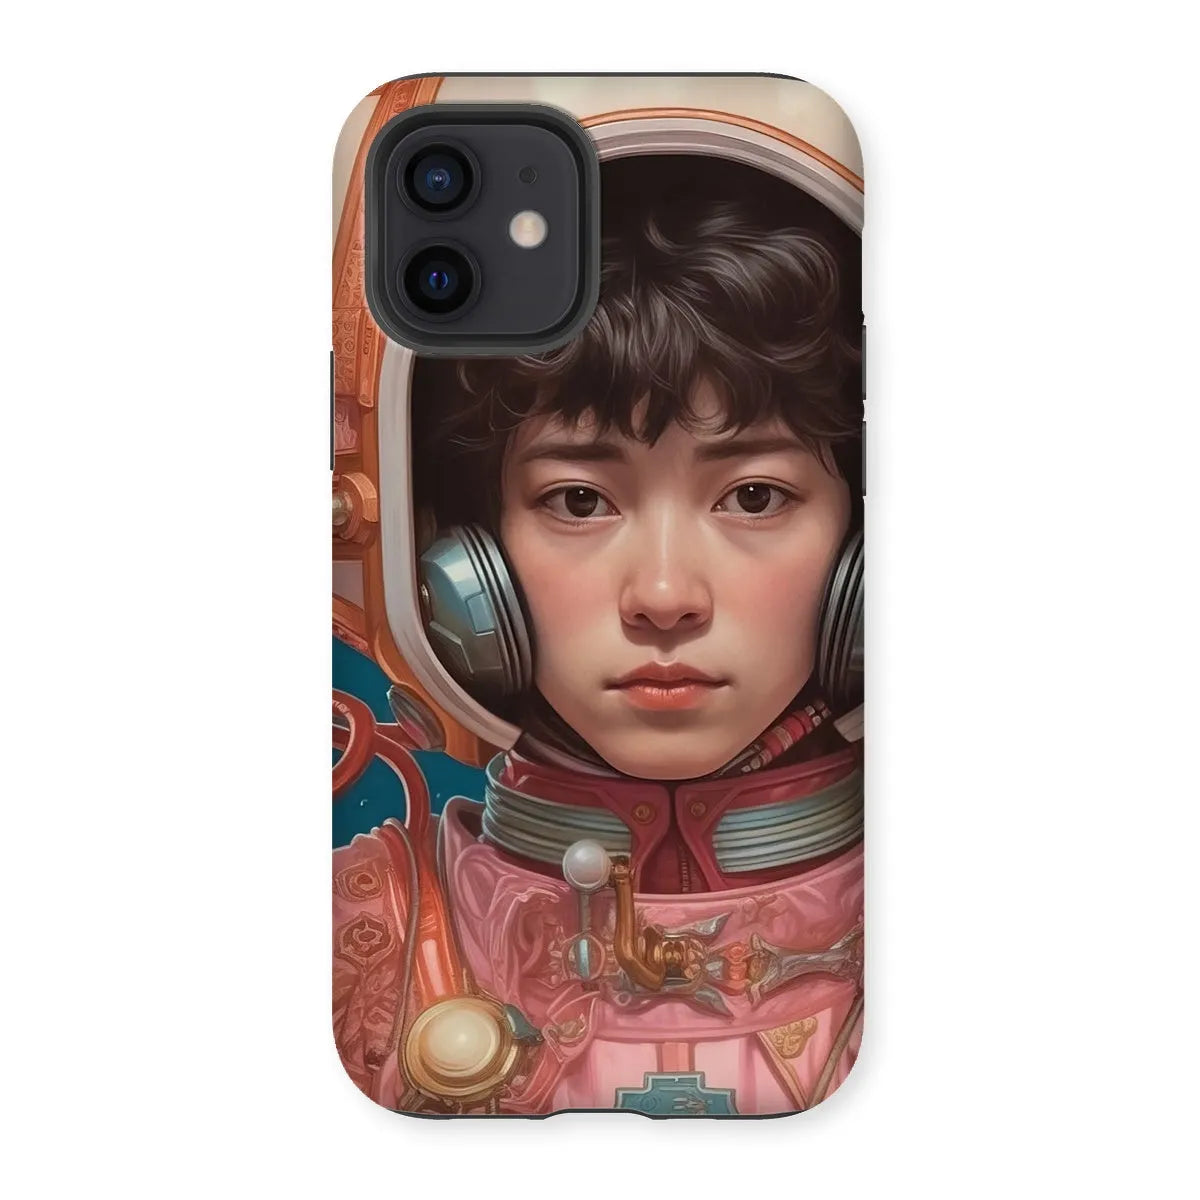 Kaito The Gay Astronaut - Lgbtq Art Phone Case - Iphone 12 / Matte - Mobile Phone Cases - Aesthetic Art